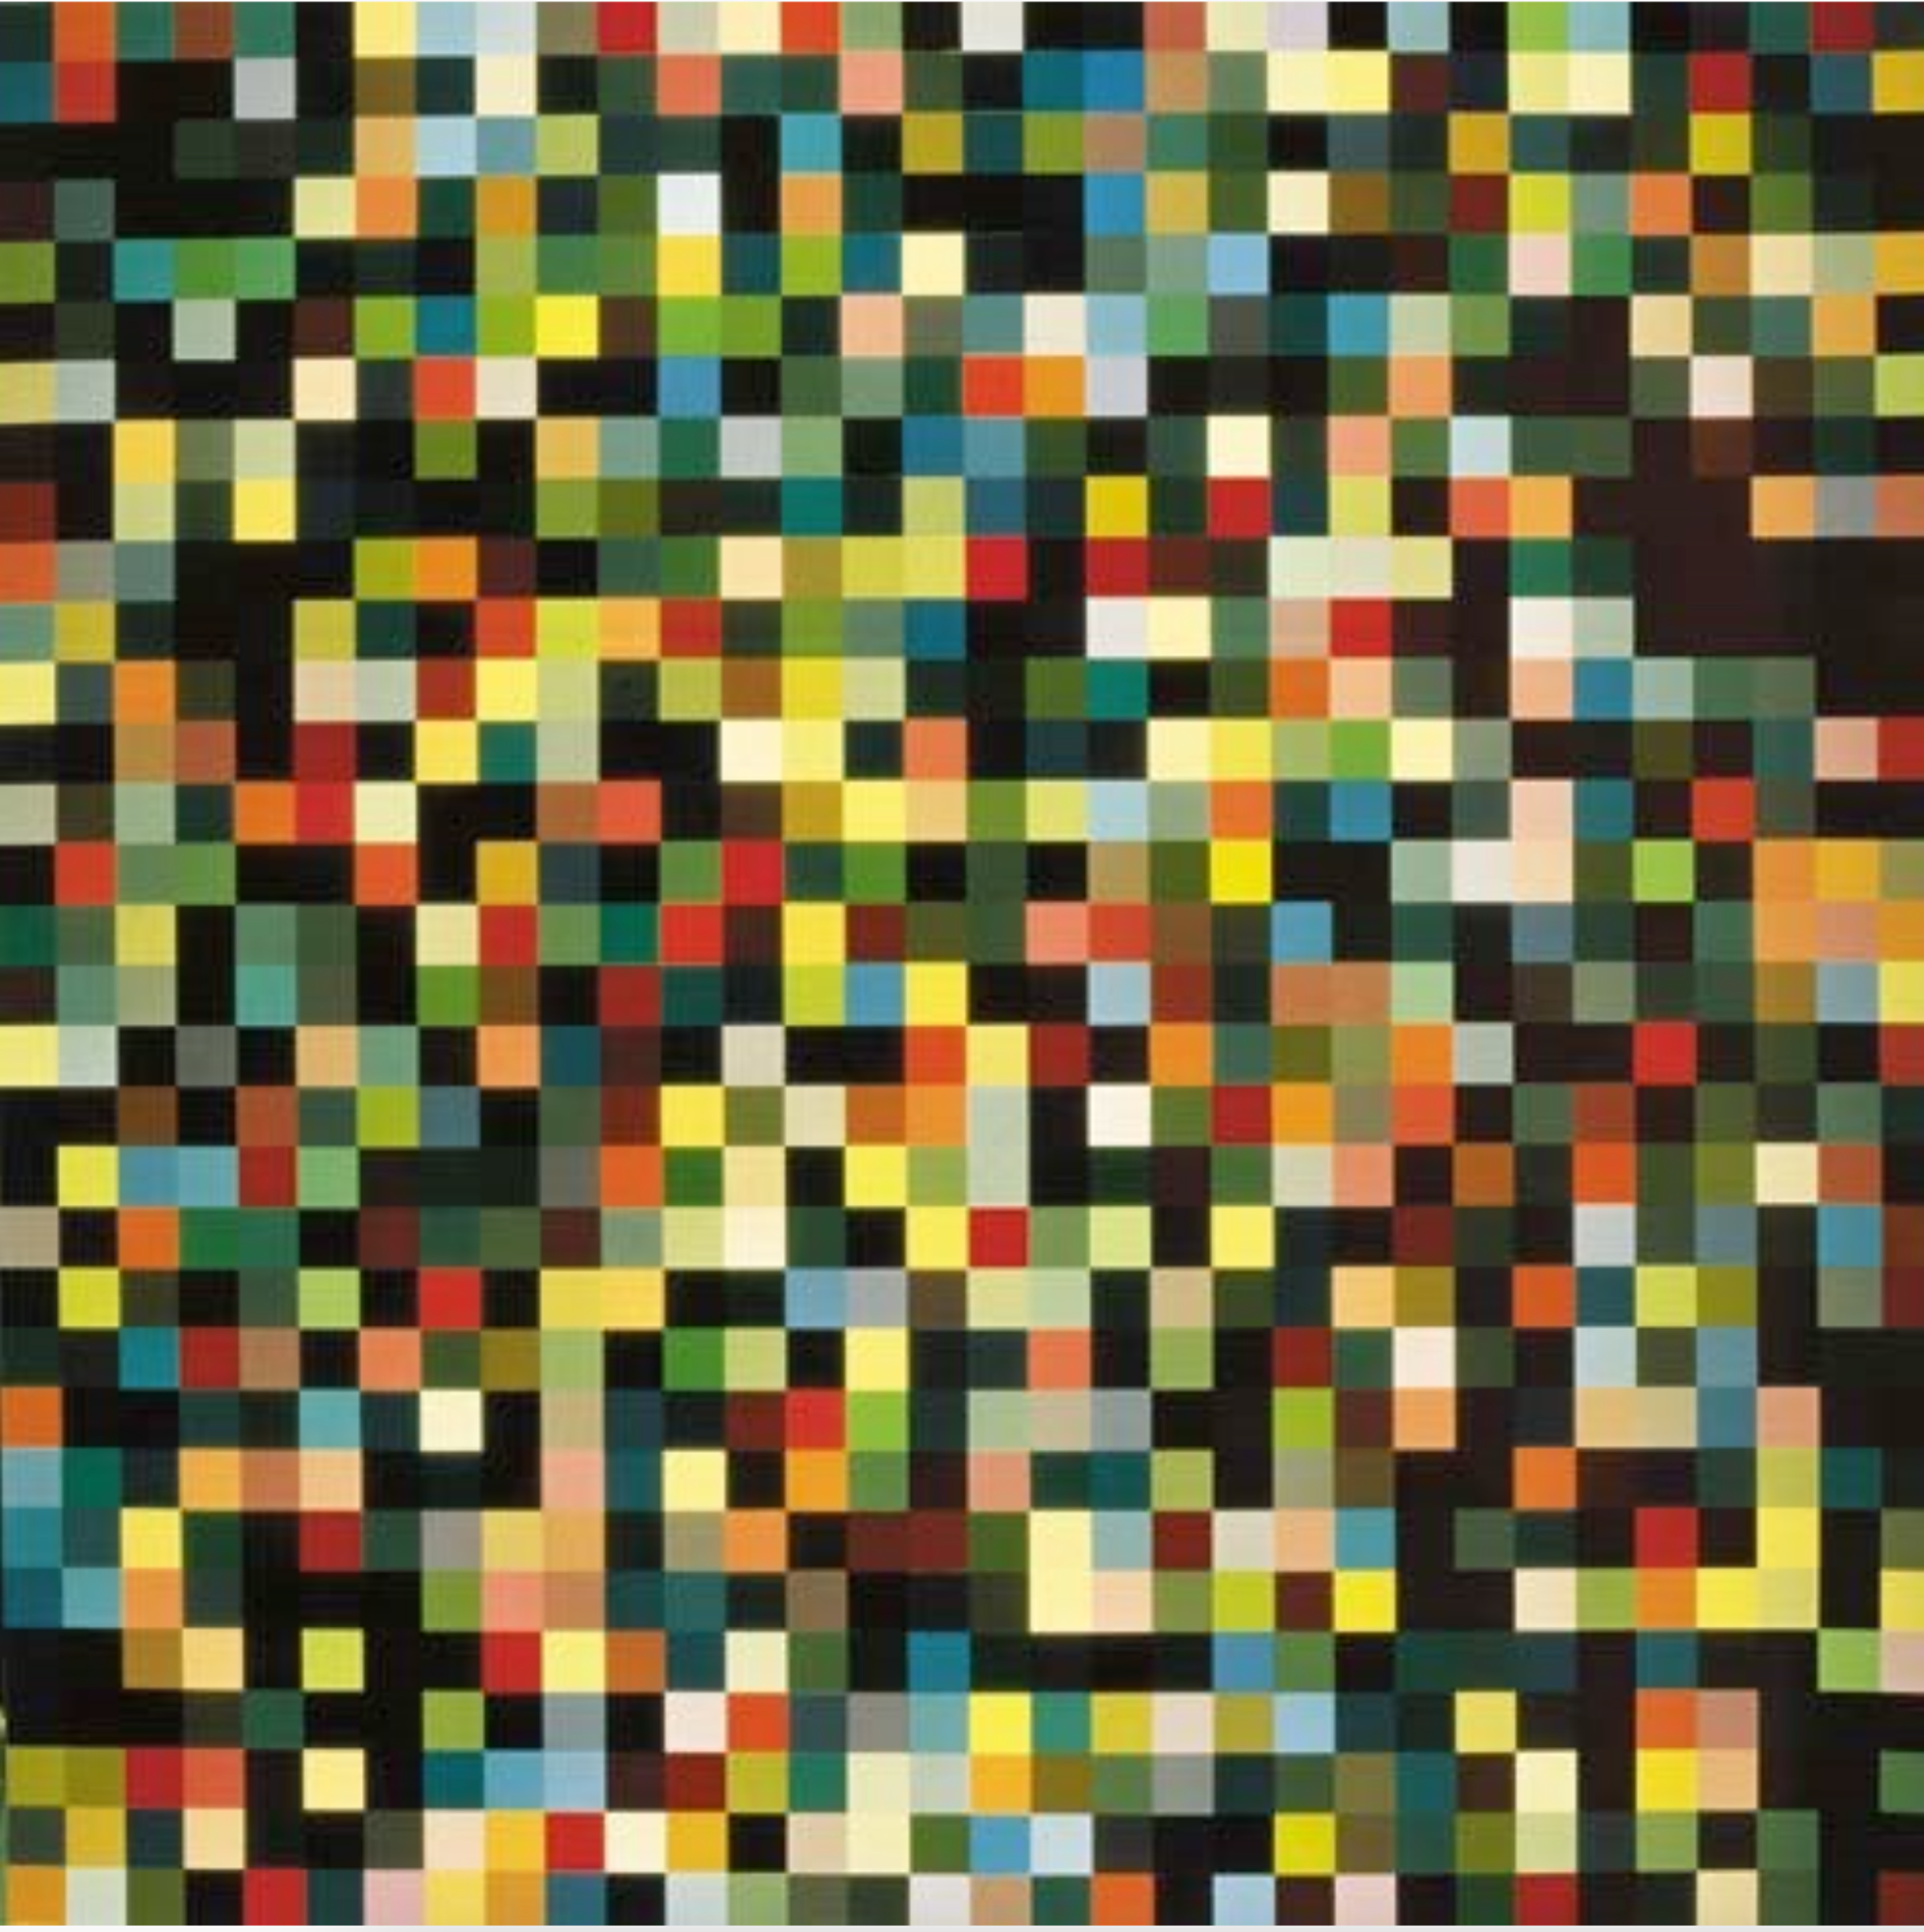 Painting by Gerhard Richter, depicting 1024 evenly sized squares, in varying shades of grey, yellow, red, blue, orange, green and black.